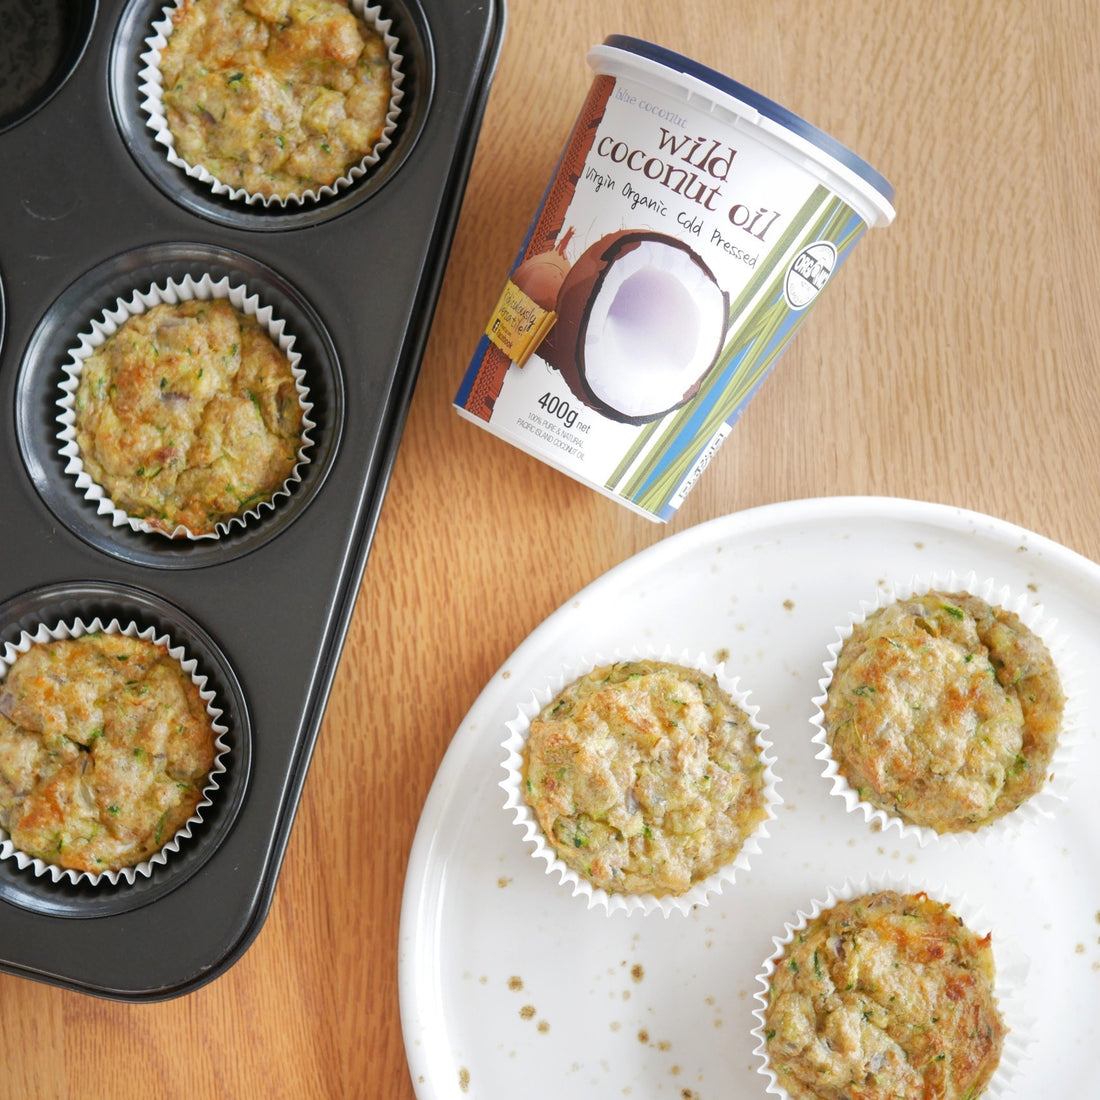 Courgette & Cheese Muffins